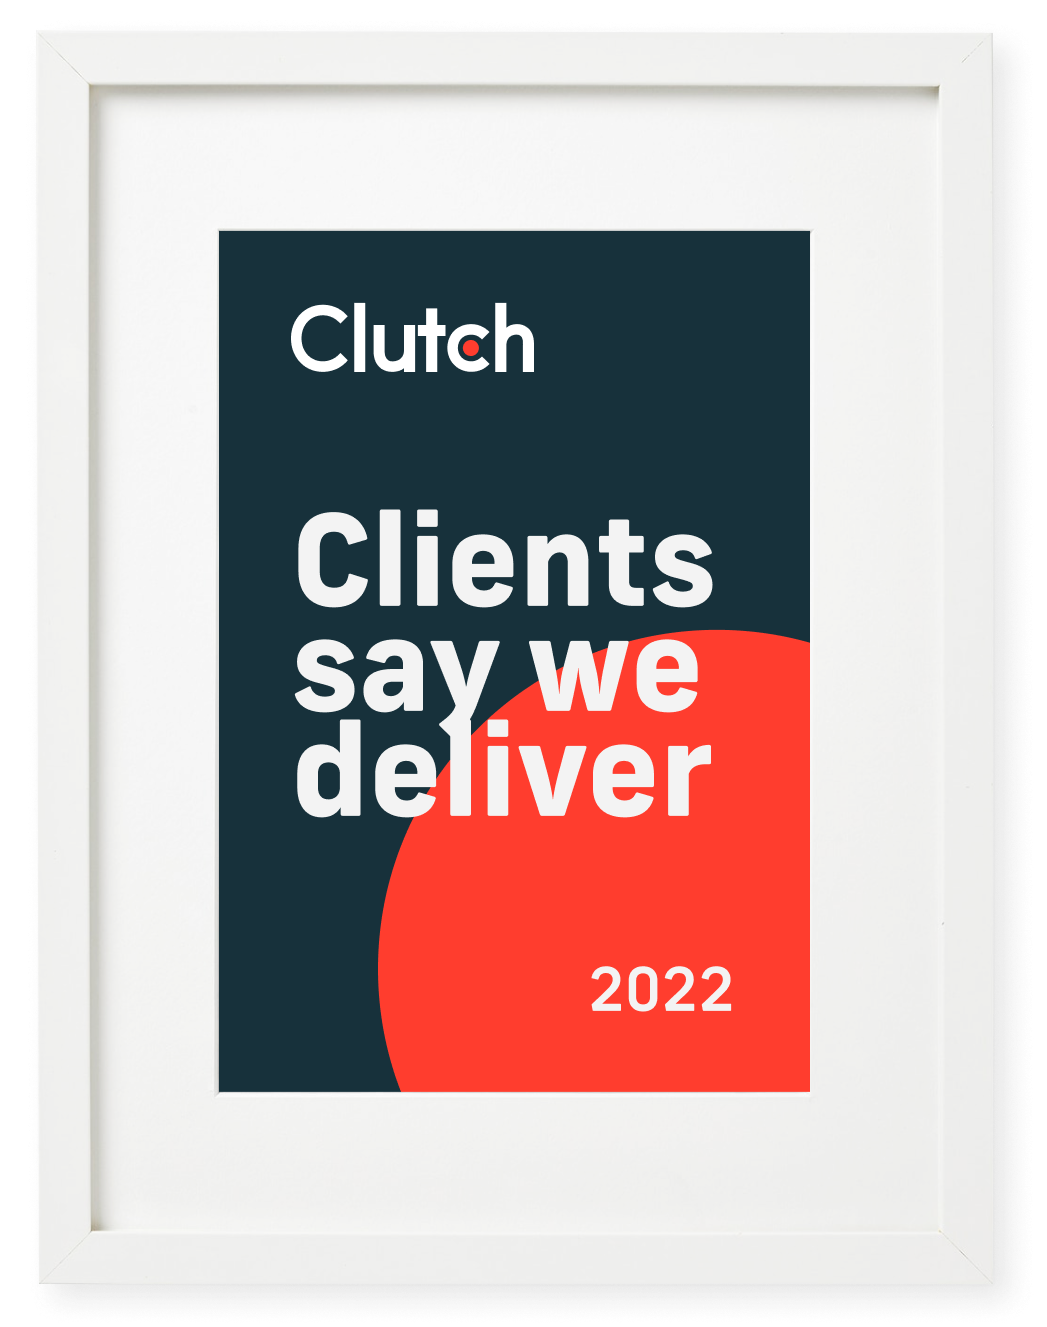 Clienst say we deliver on Clutch